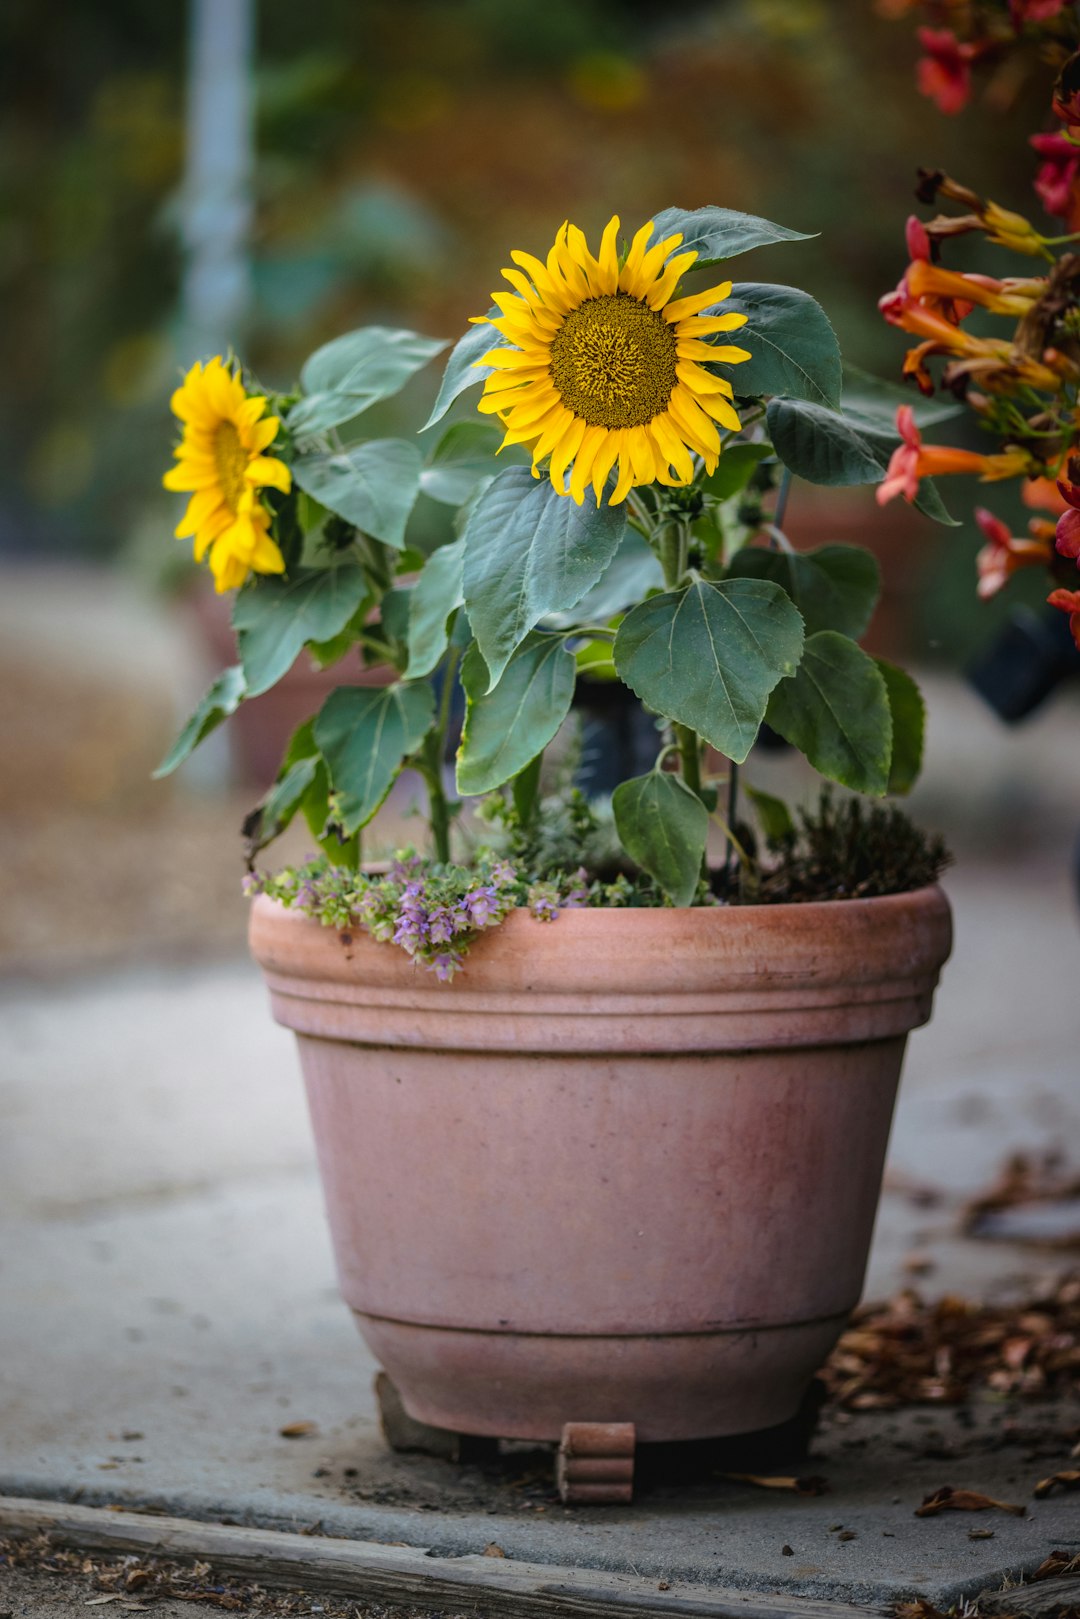 yellow and white flower in brown clay pot